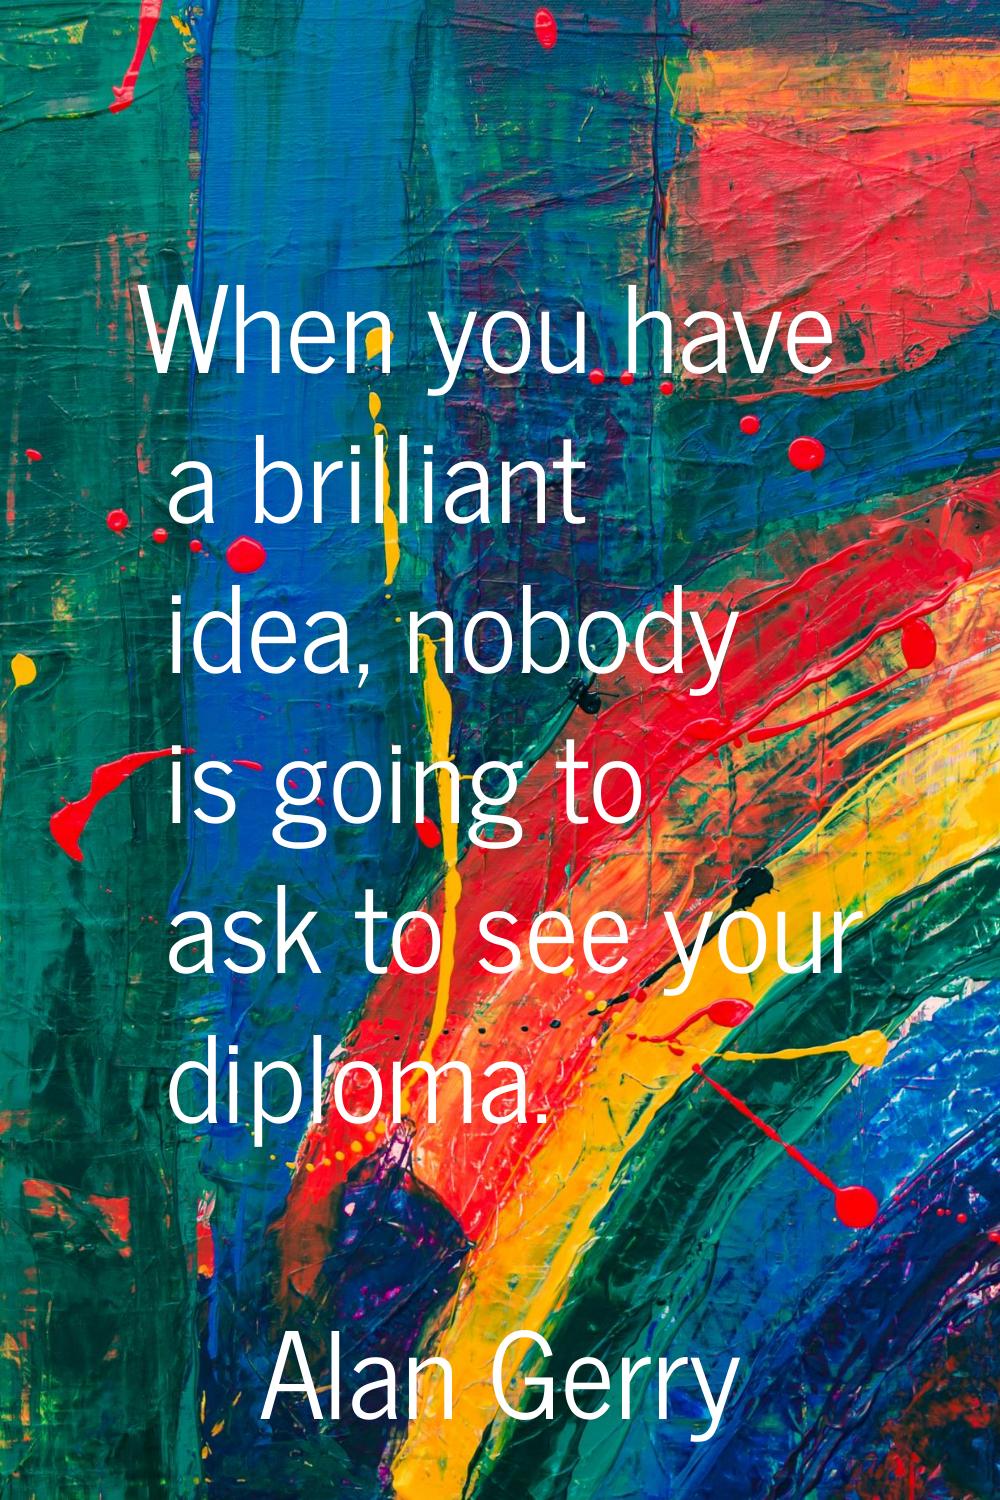 When you have a brilliant idea, nobody is going to ask to see your diploma.